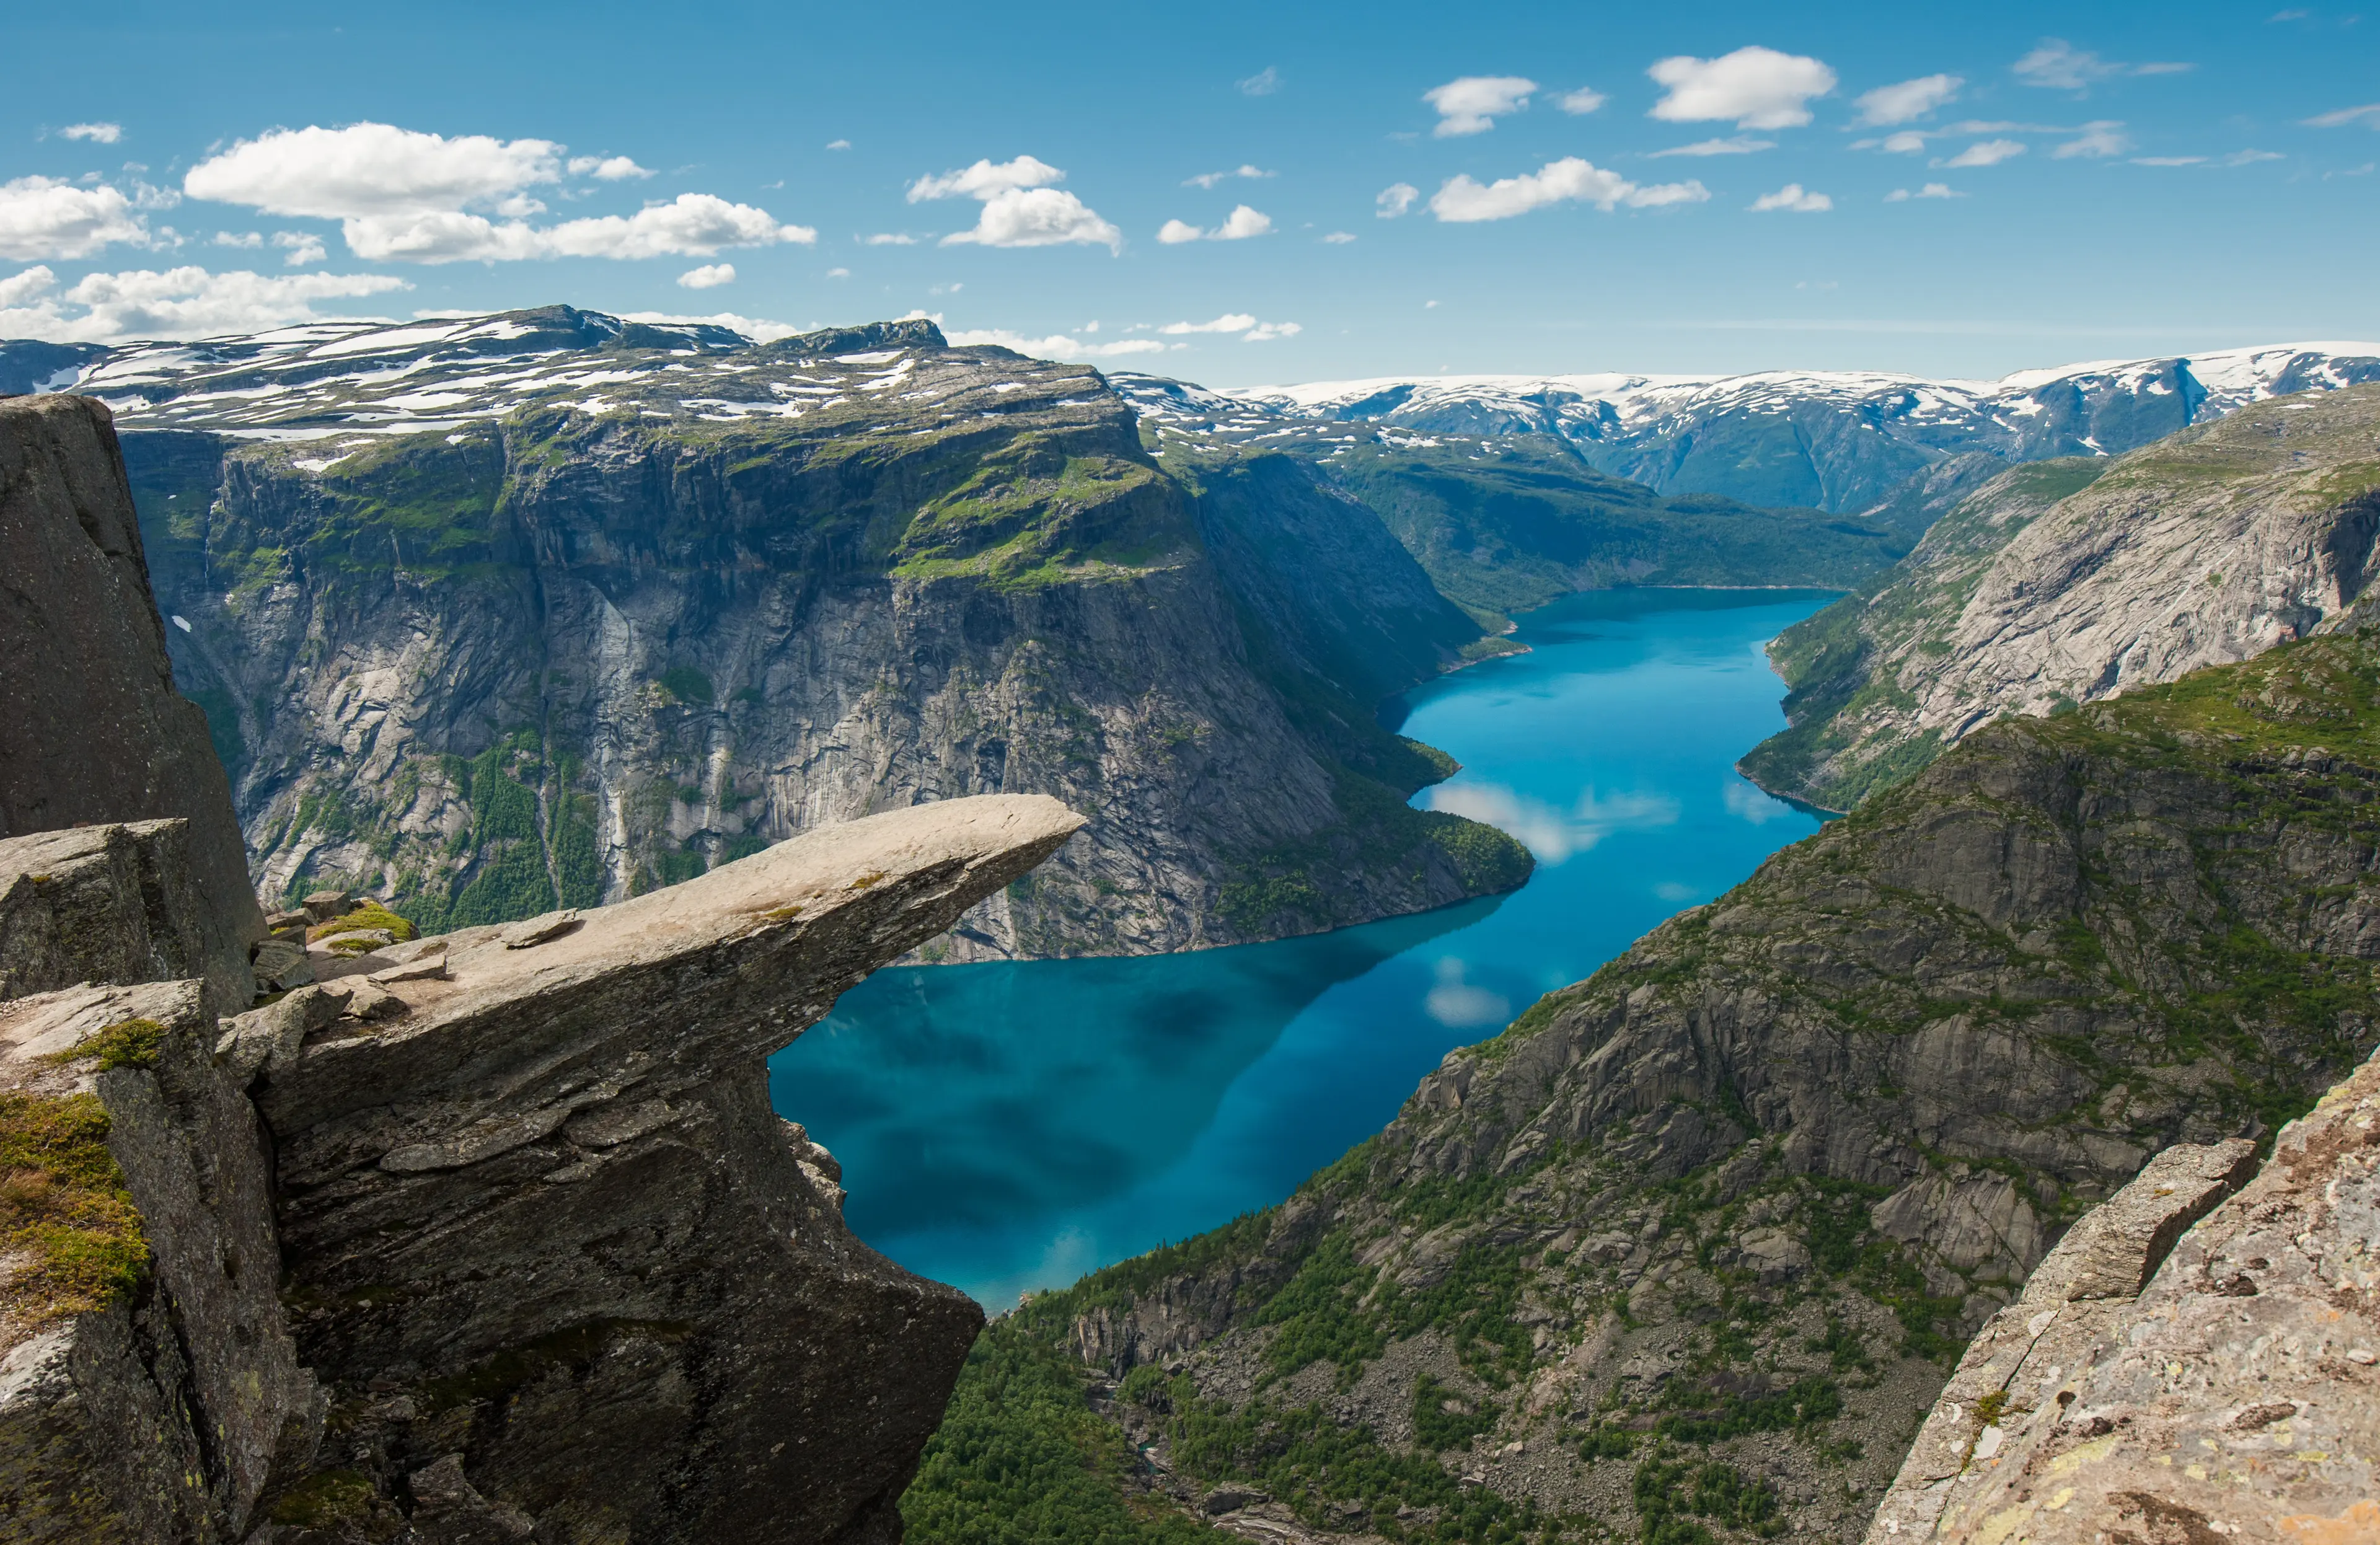 1-Day Local Experience in Norway: Family, Food, Wine, and Relaxation